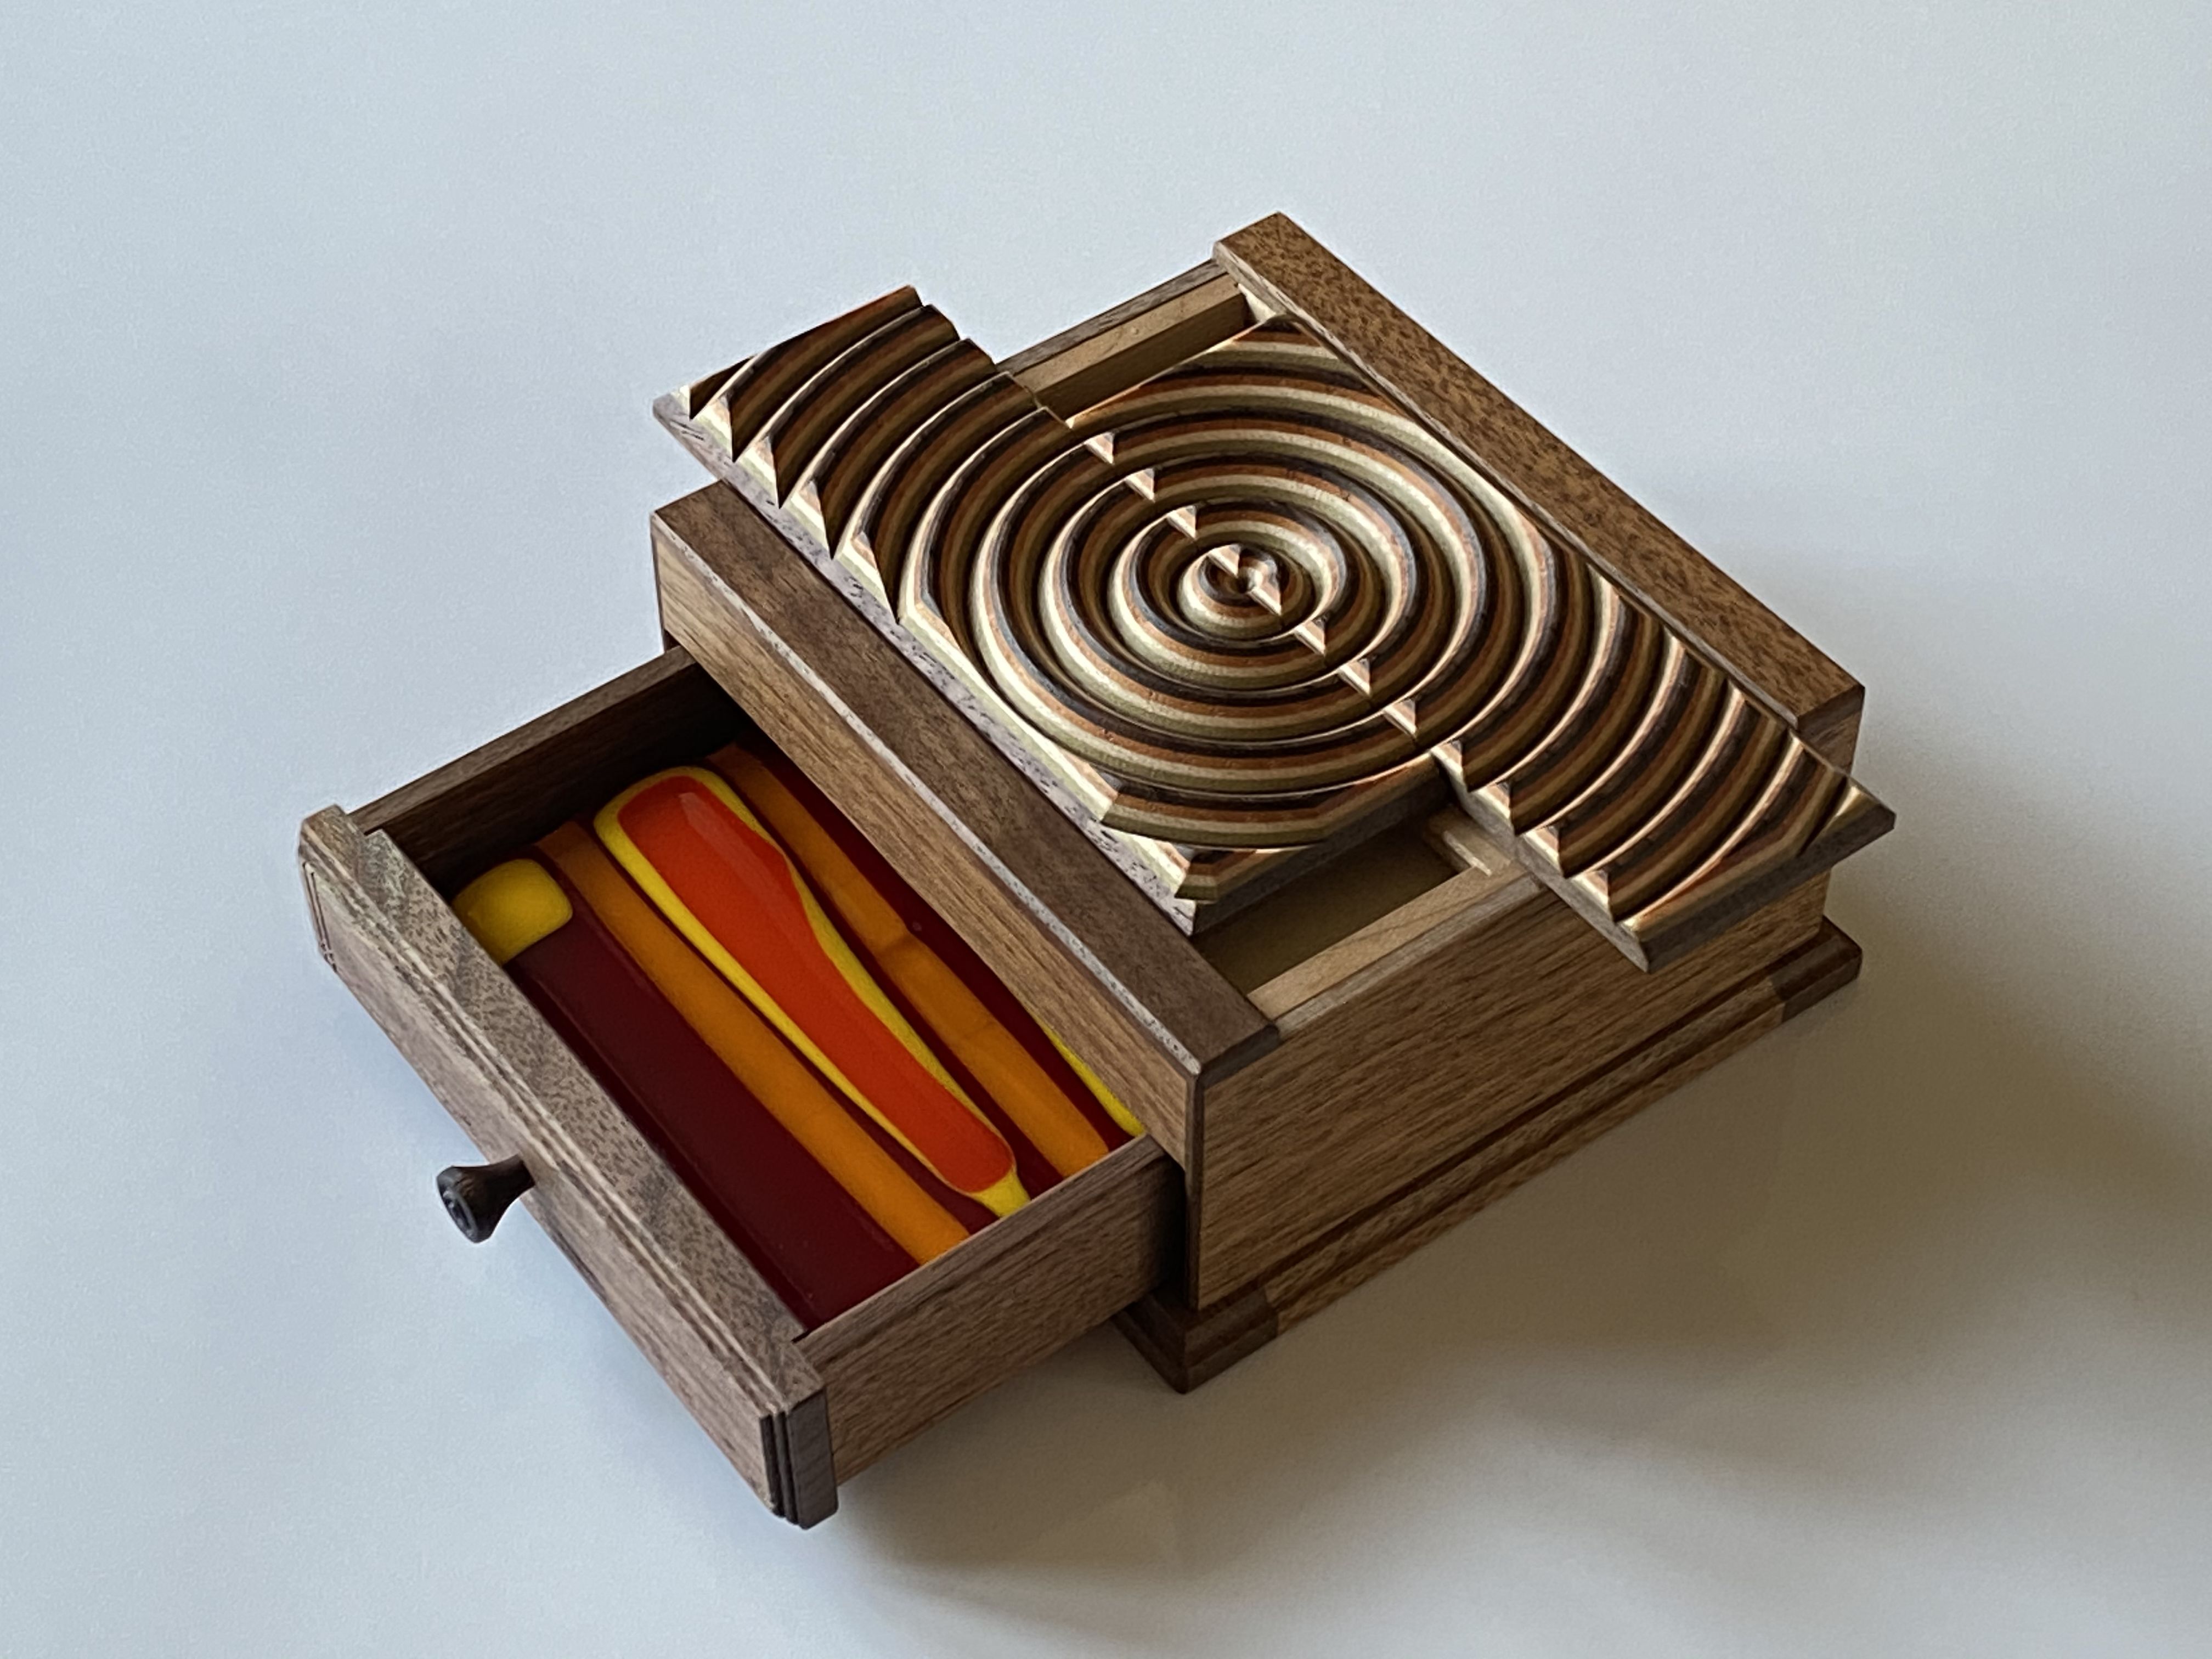 Ripple out karakuri puzzle box | MA by So Shi Te Puzzle box specialty store from Tokyo Japan